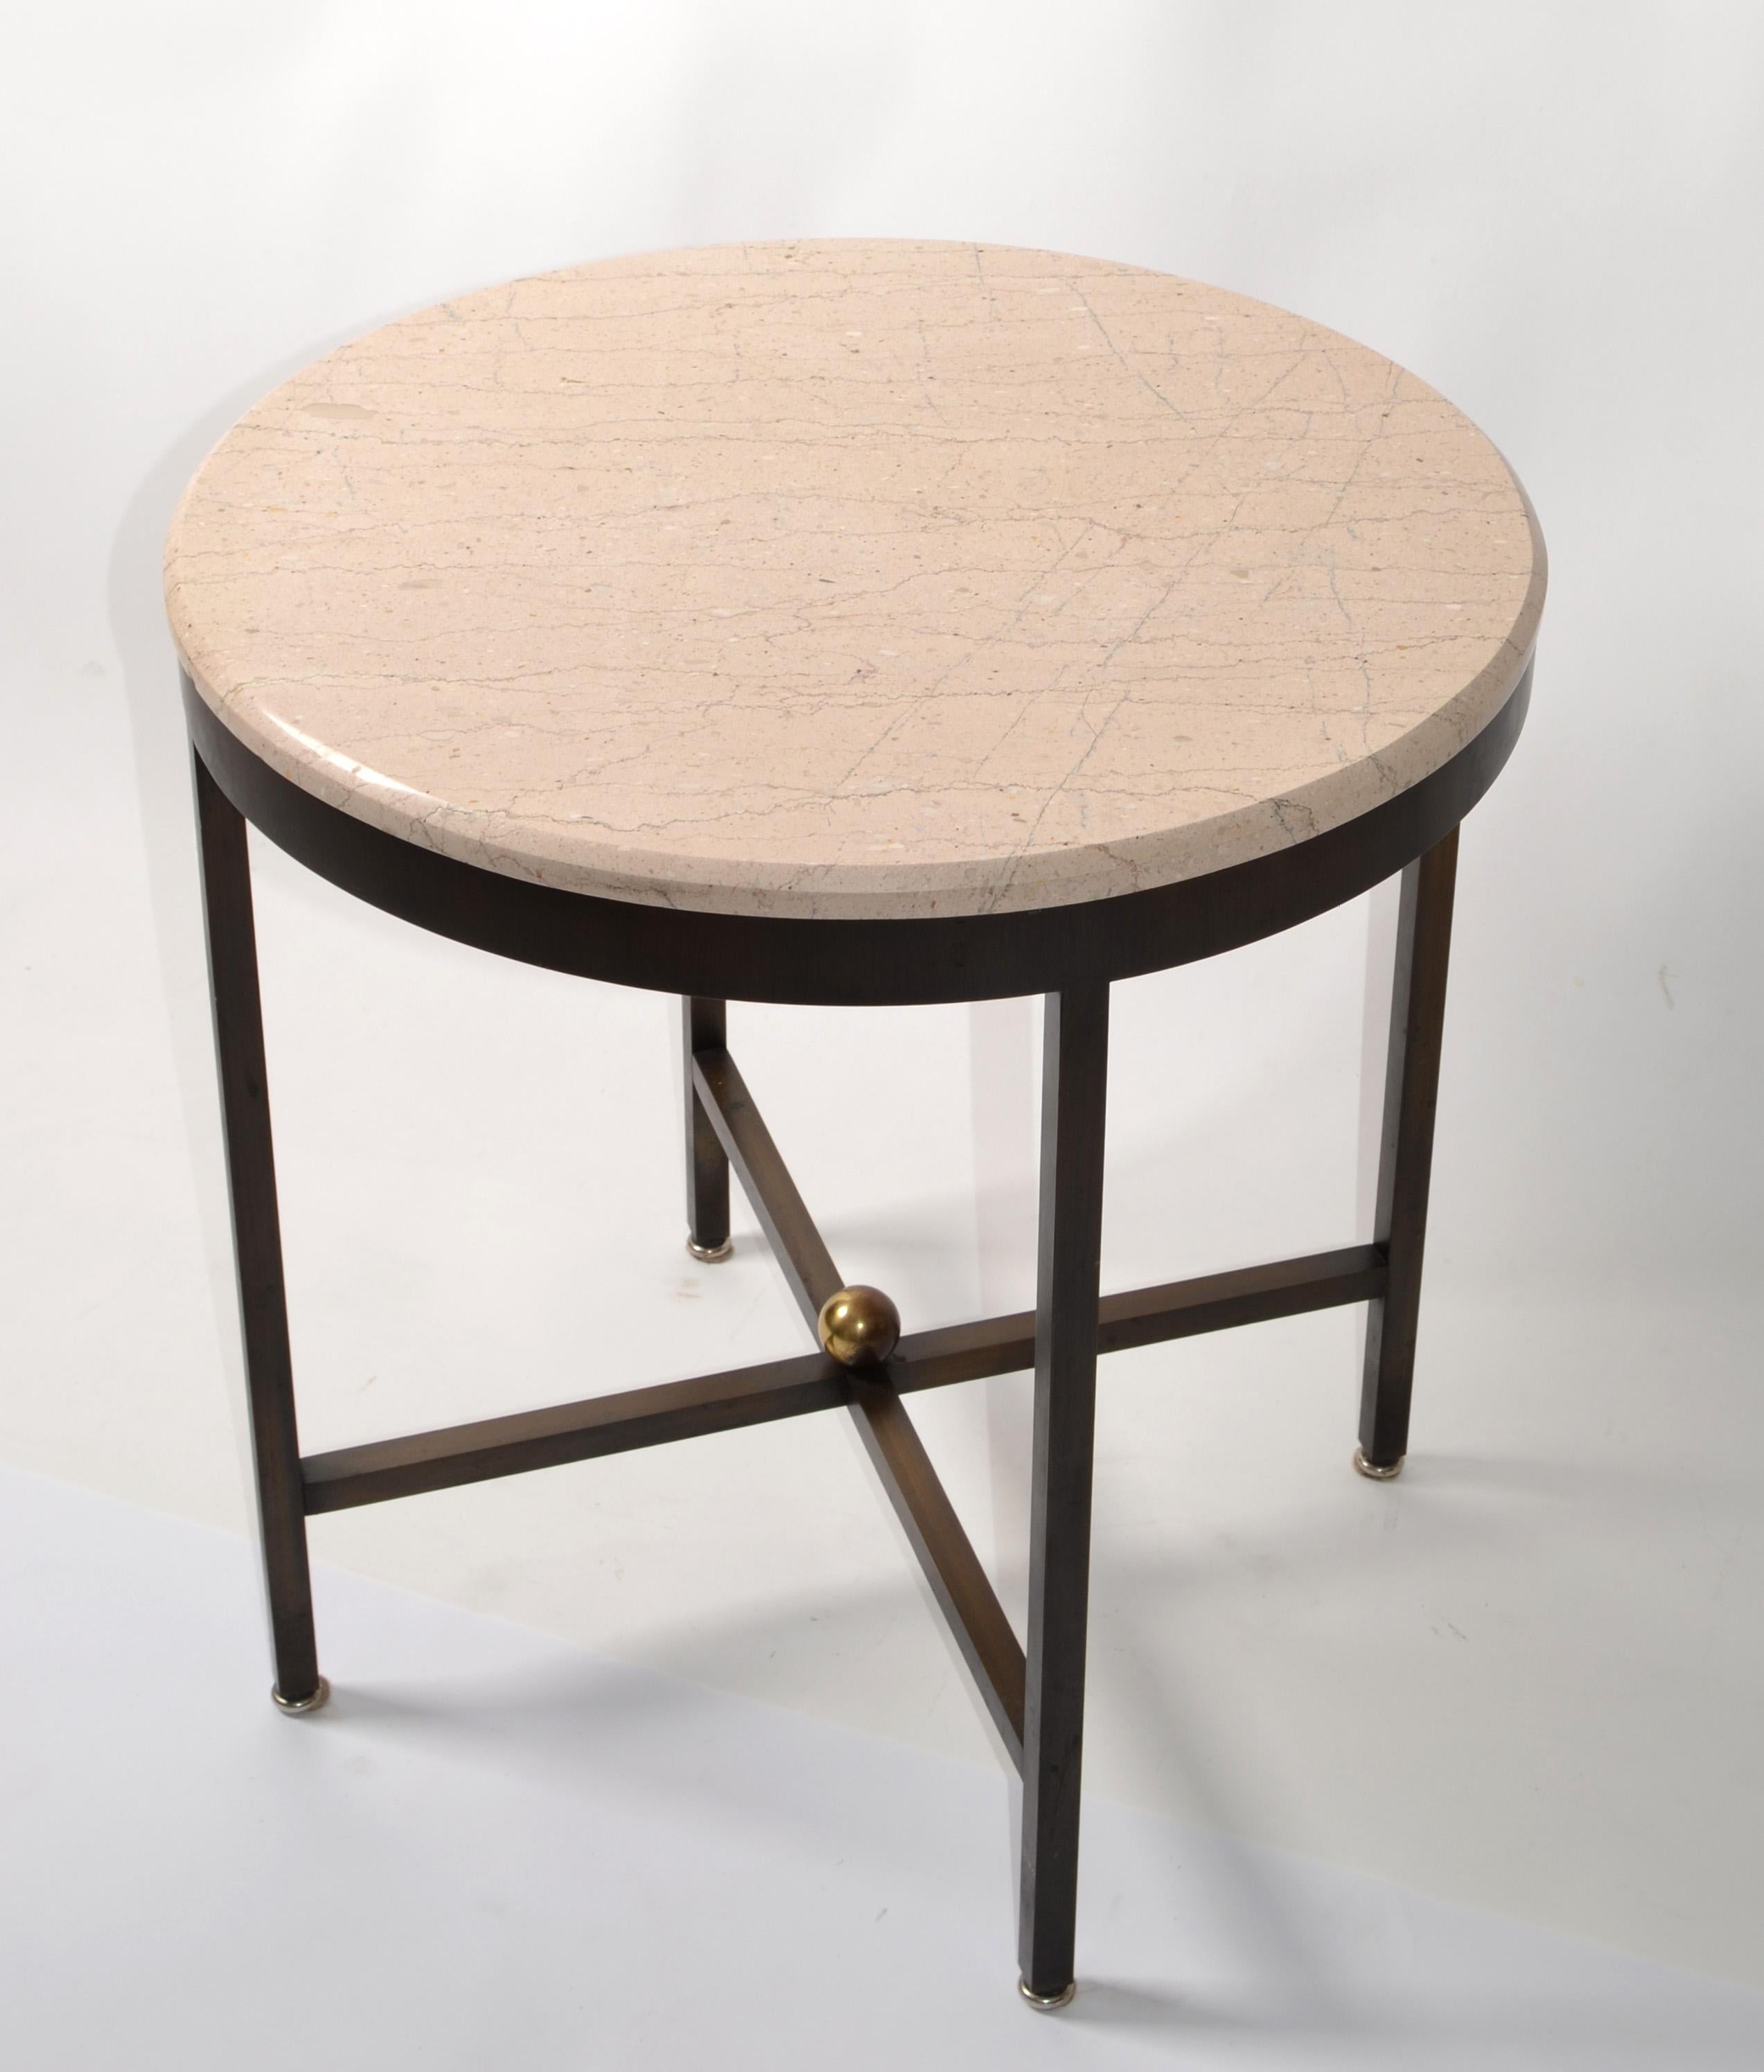 Mid-20th Century Italian Bronze Brass Beveled Round Tan Stone Top Side Table  For Sale 2